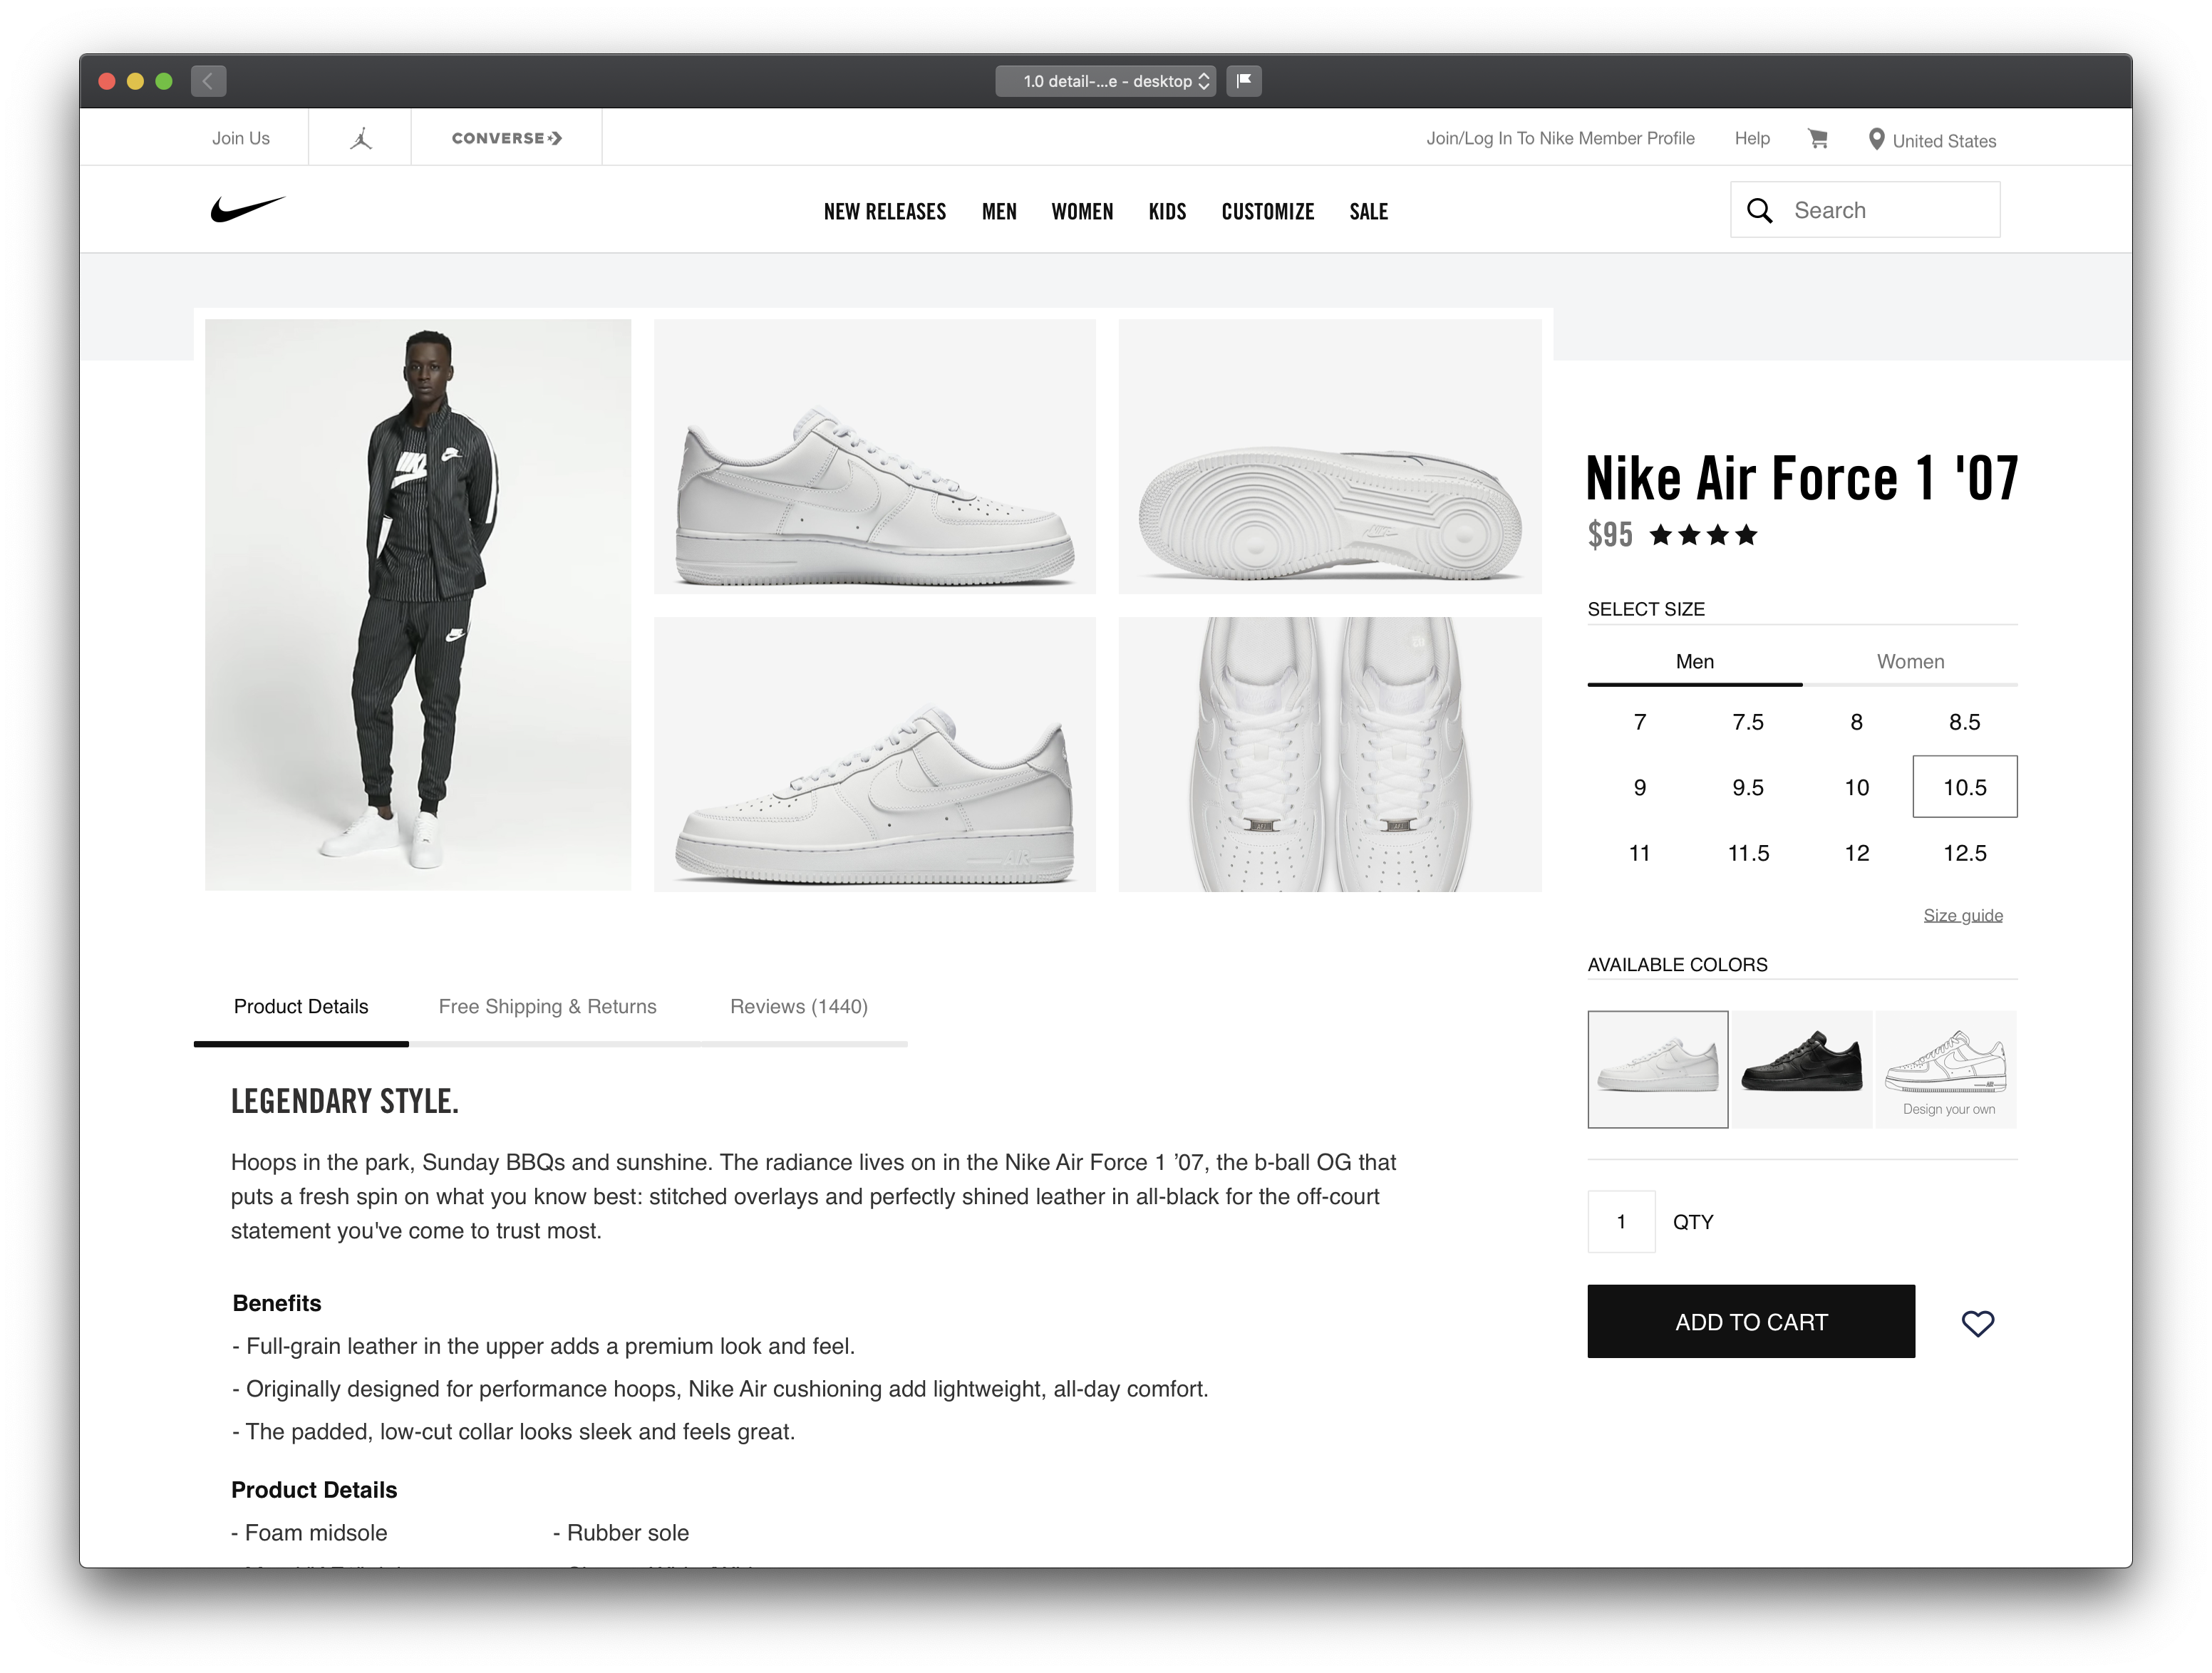 An example of a landing page for Nike Air Force 1 '07 